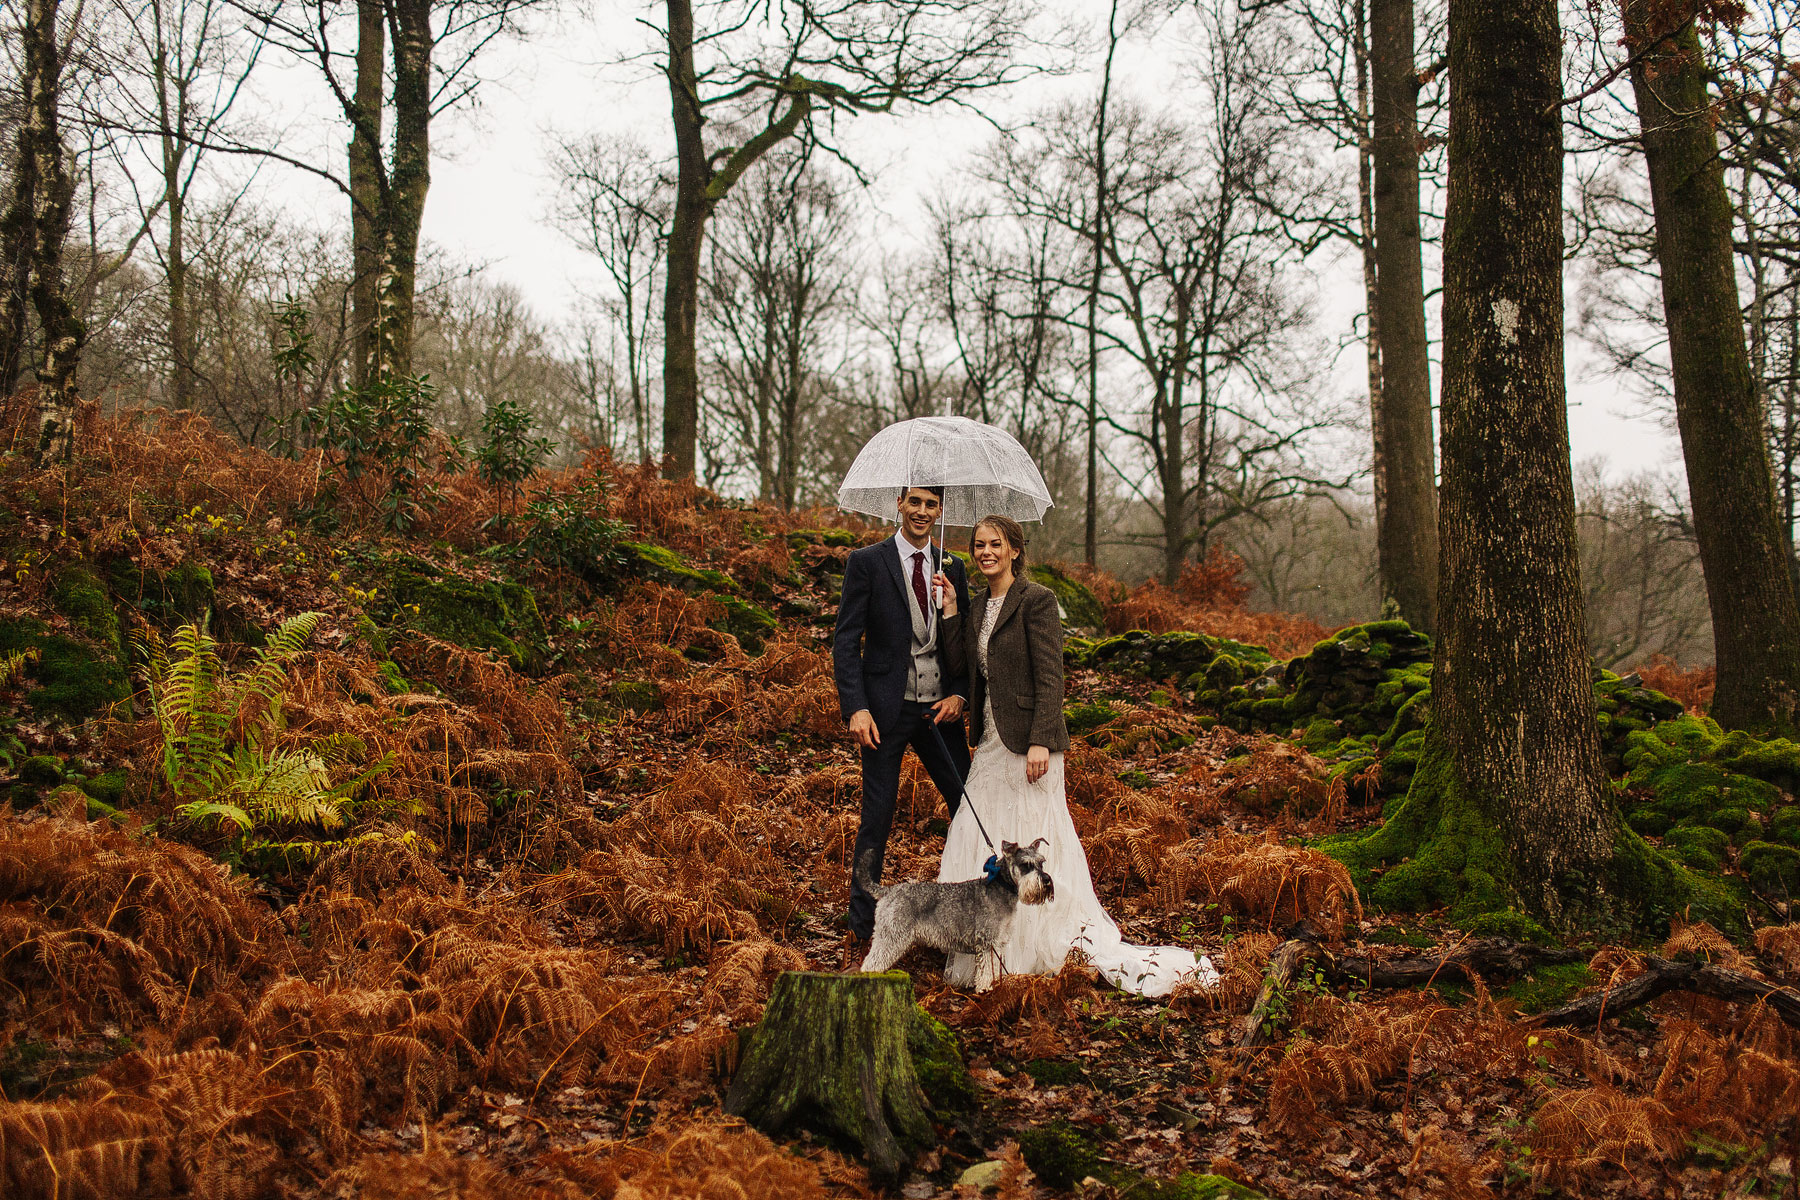 fun and quirky wedding photos in the lake district